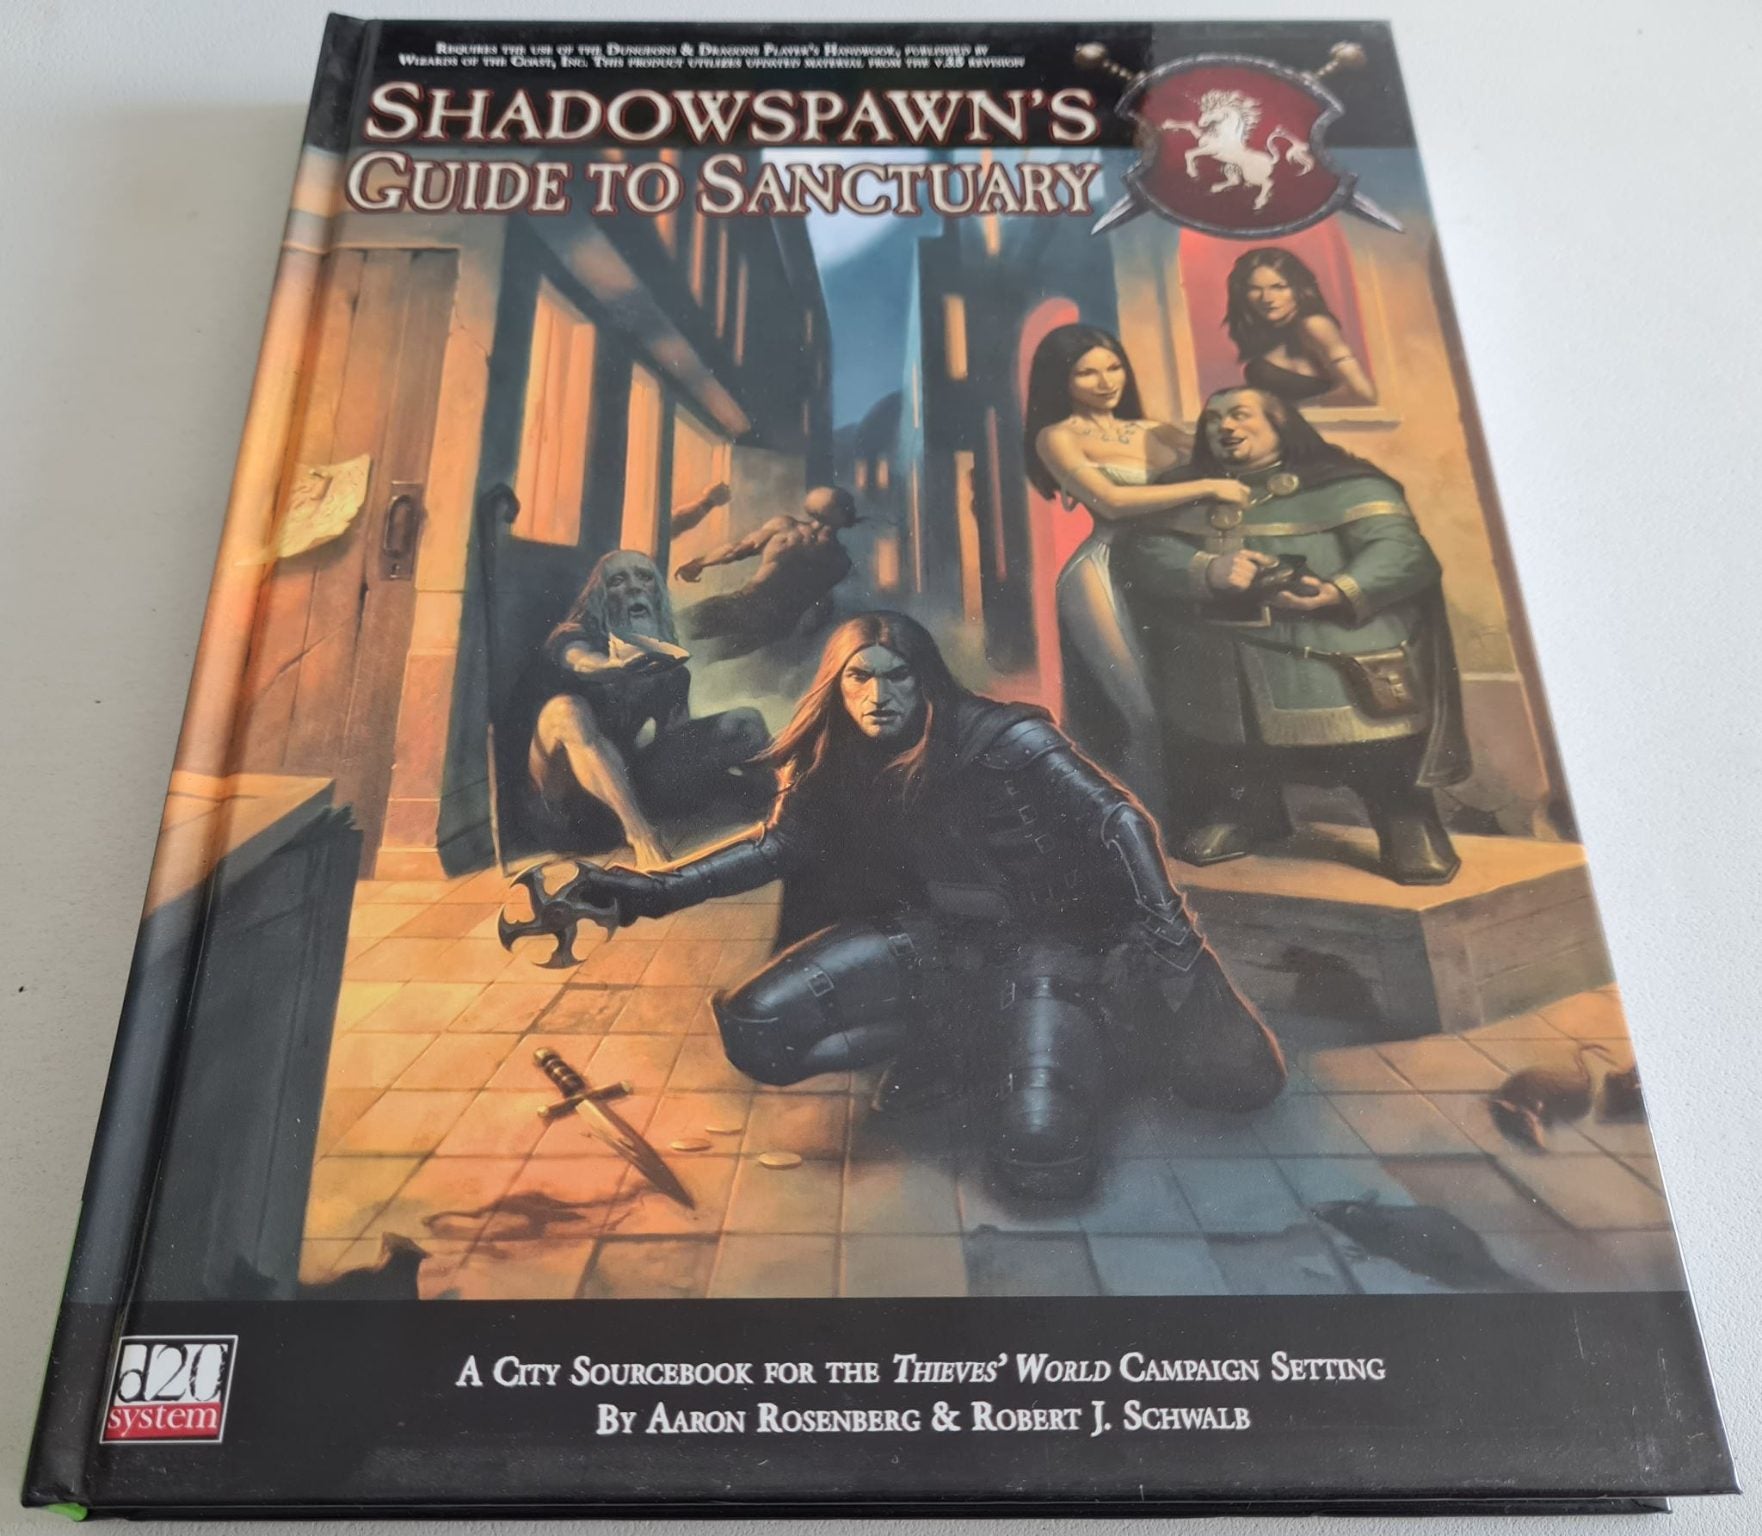 Thieves' World: Shadowspawn's Guide to Sanctuary (D20 System)